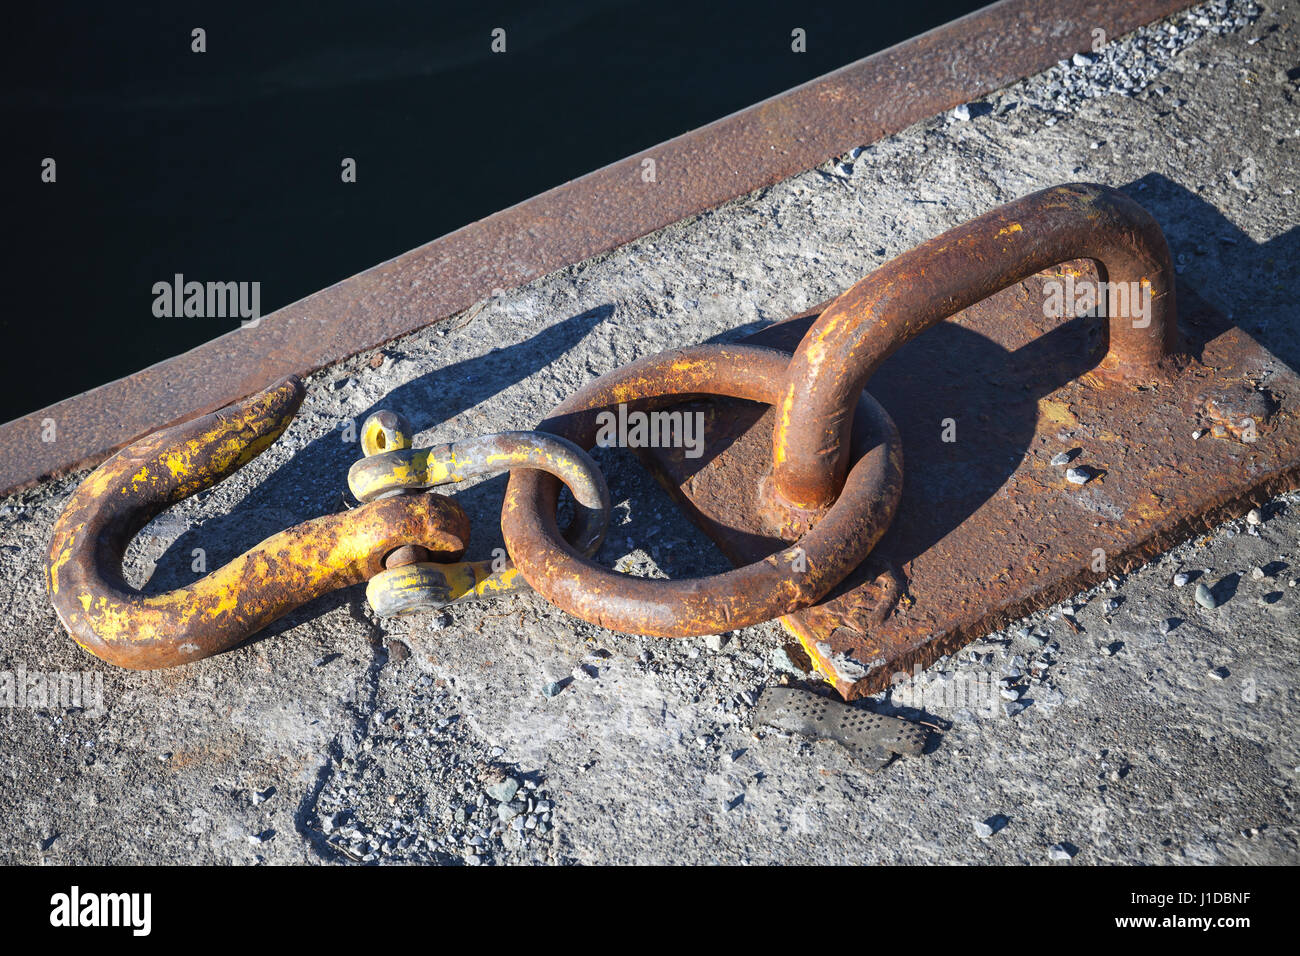 Ships mooring equipment, rusted hook mounted in concrete pier Stock Photo